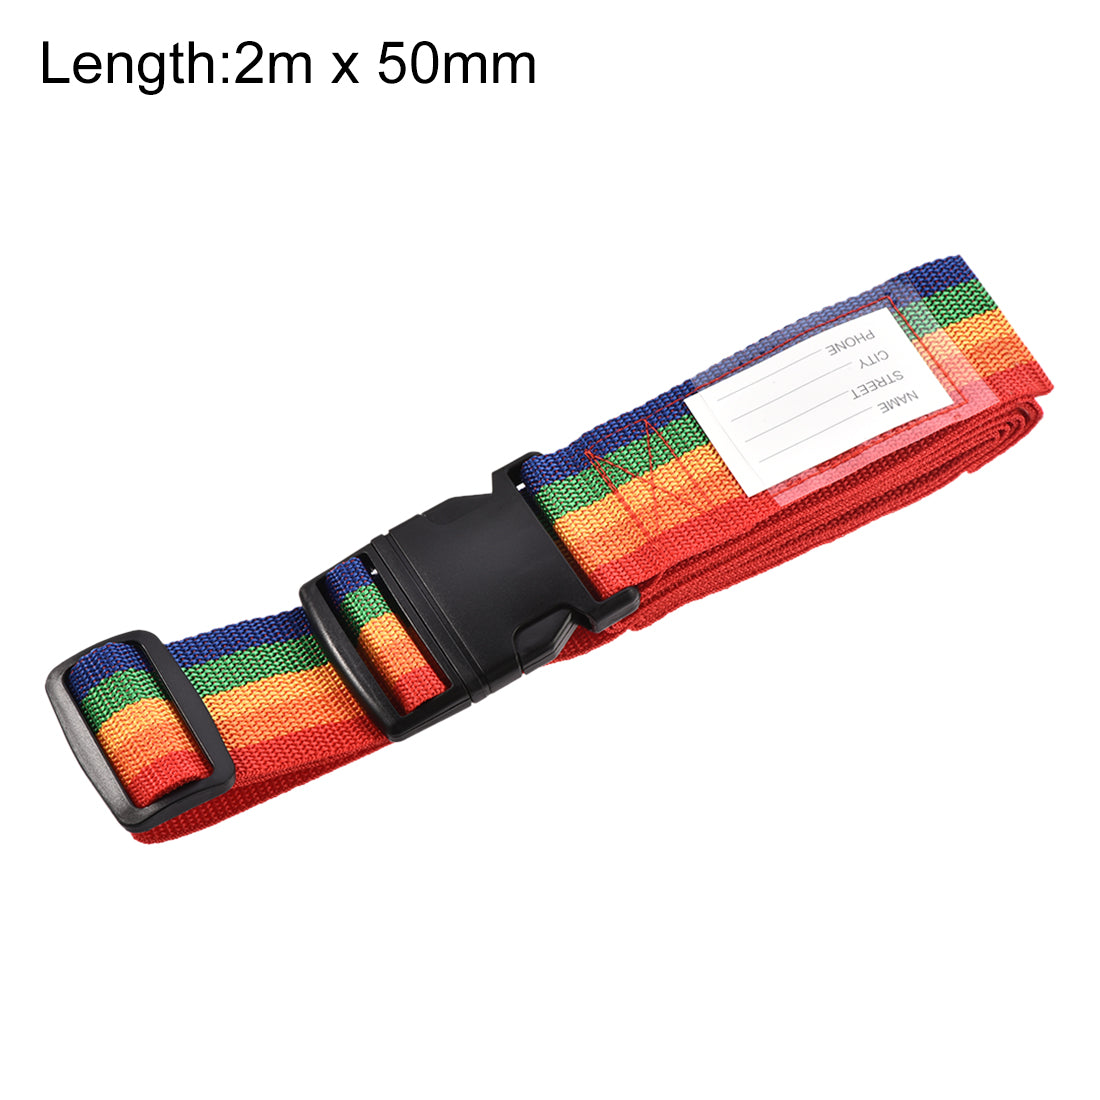 uxcell Uxcell Luggage Straps Suitcase Belts with Buckle Label, 2Mx5cm Adjustable PP Travel Bag Packing Accessories, Multi Color (Red Orange Yellow Green Blue) 4Pcs